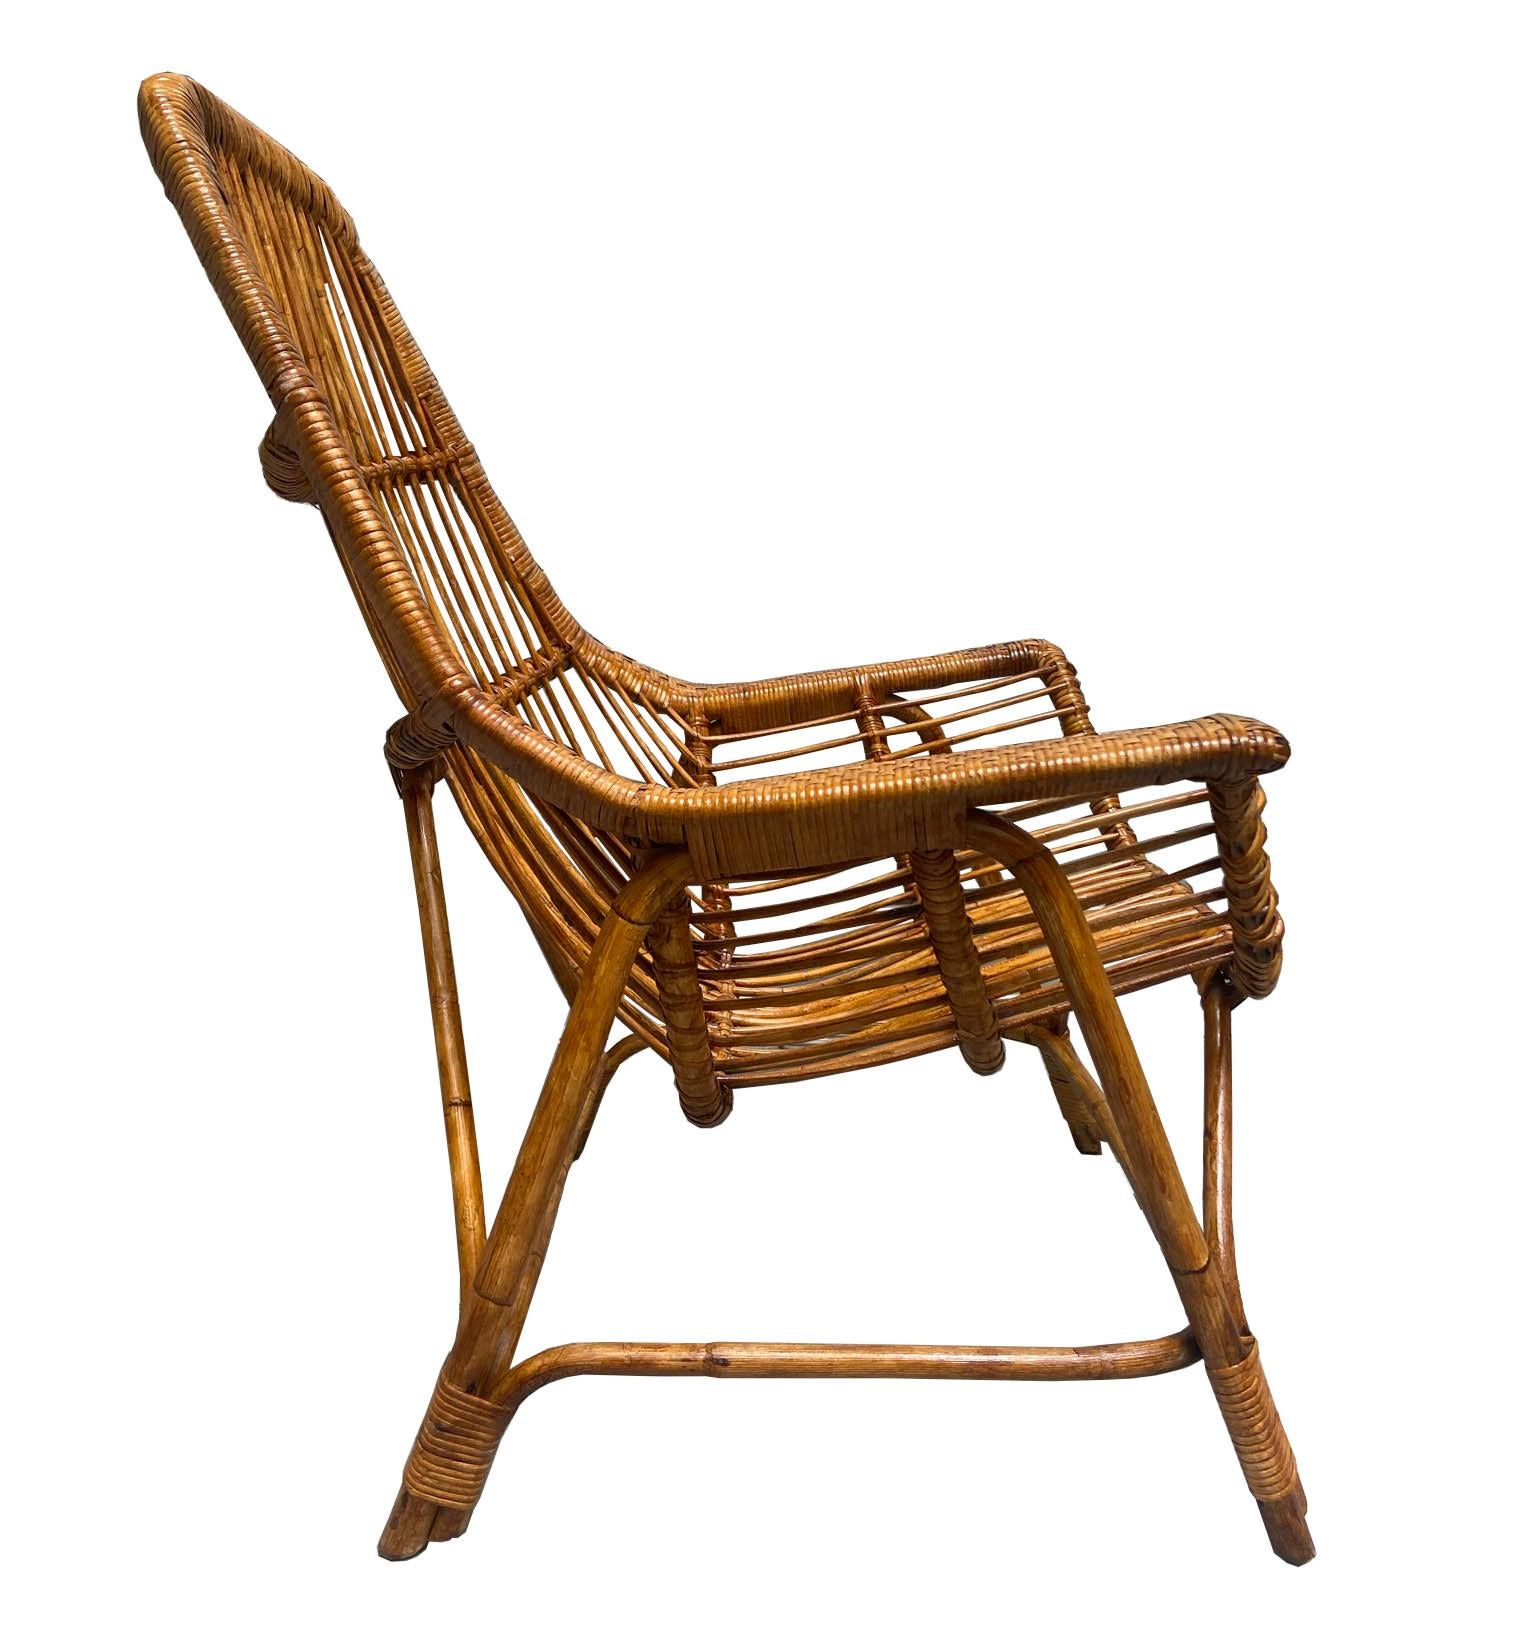 Wonderful and sculptural single chair by Georges Coslin for Gervasoni, France, 1956
Material Malacca, Bamboo and India cane.